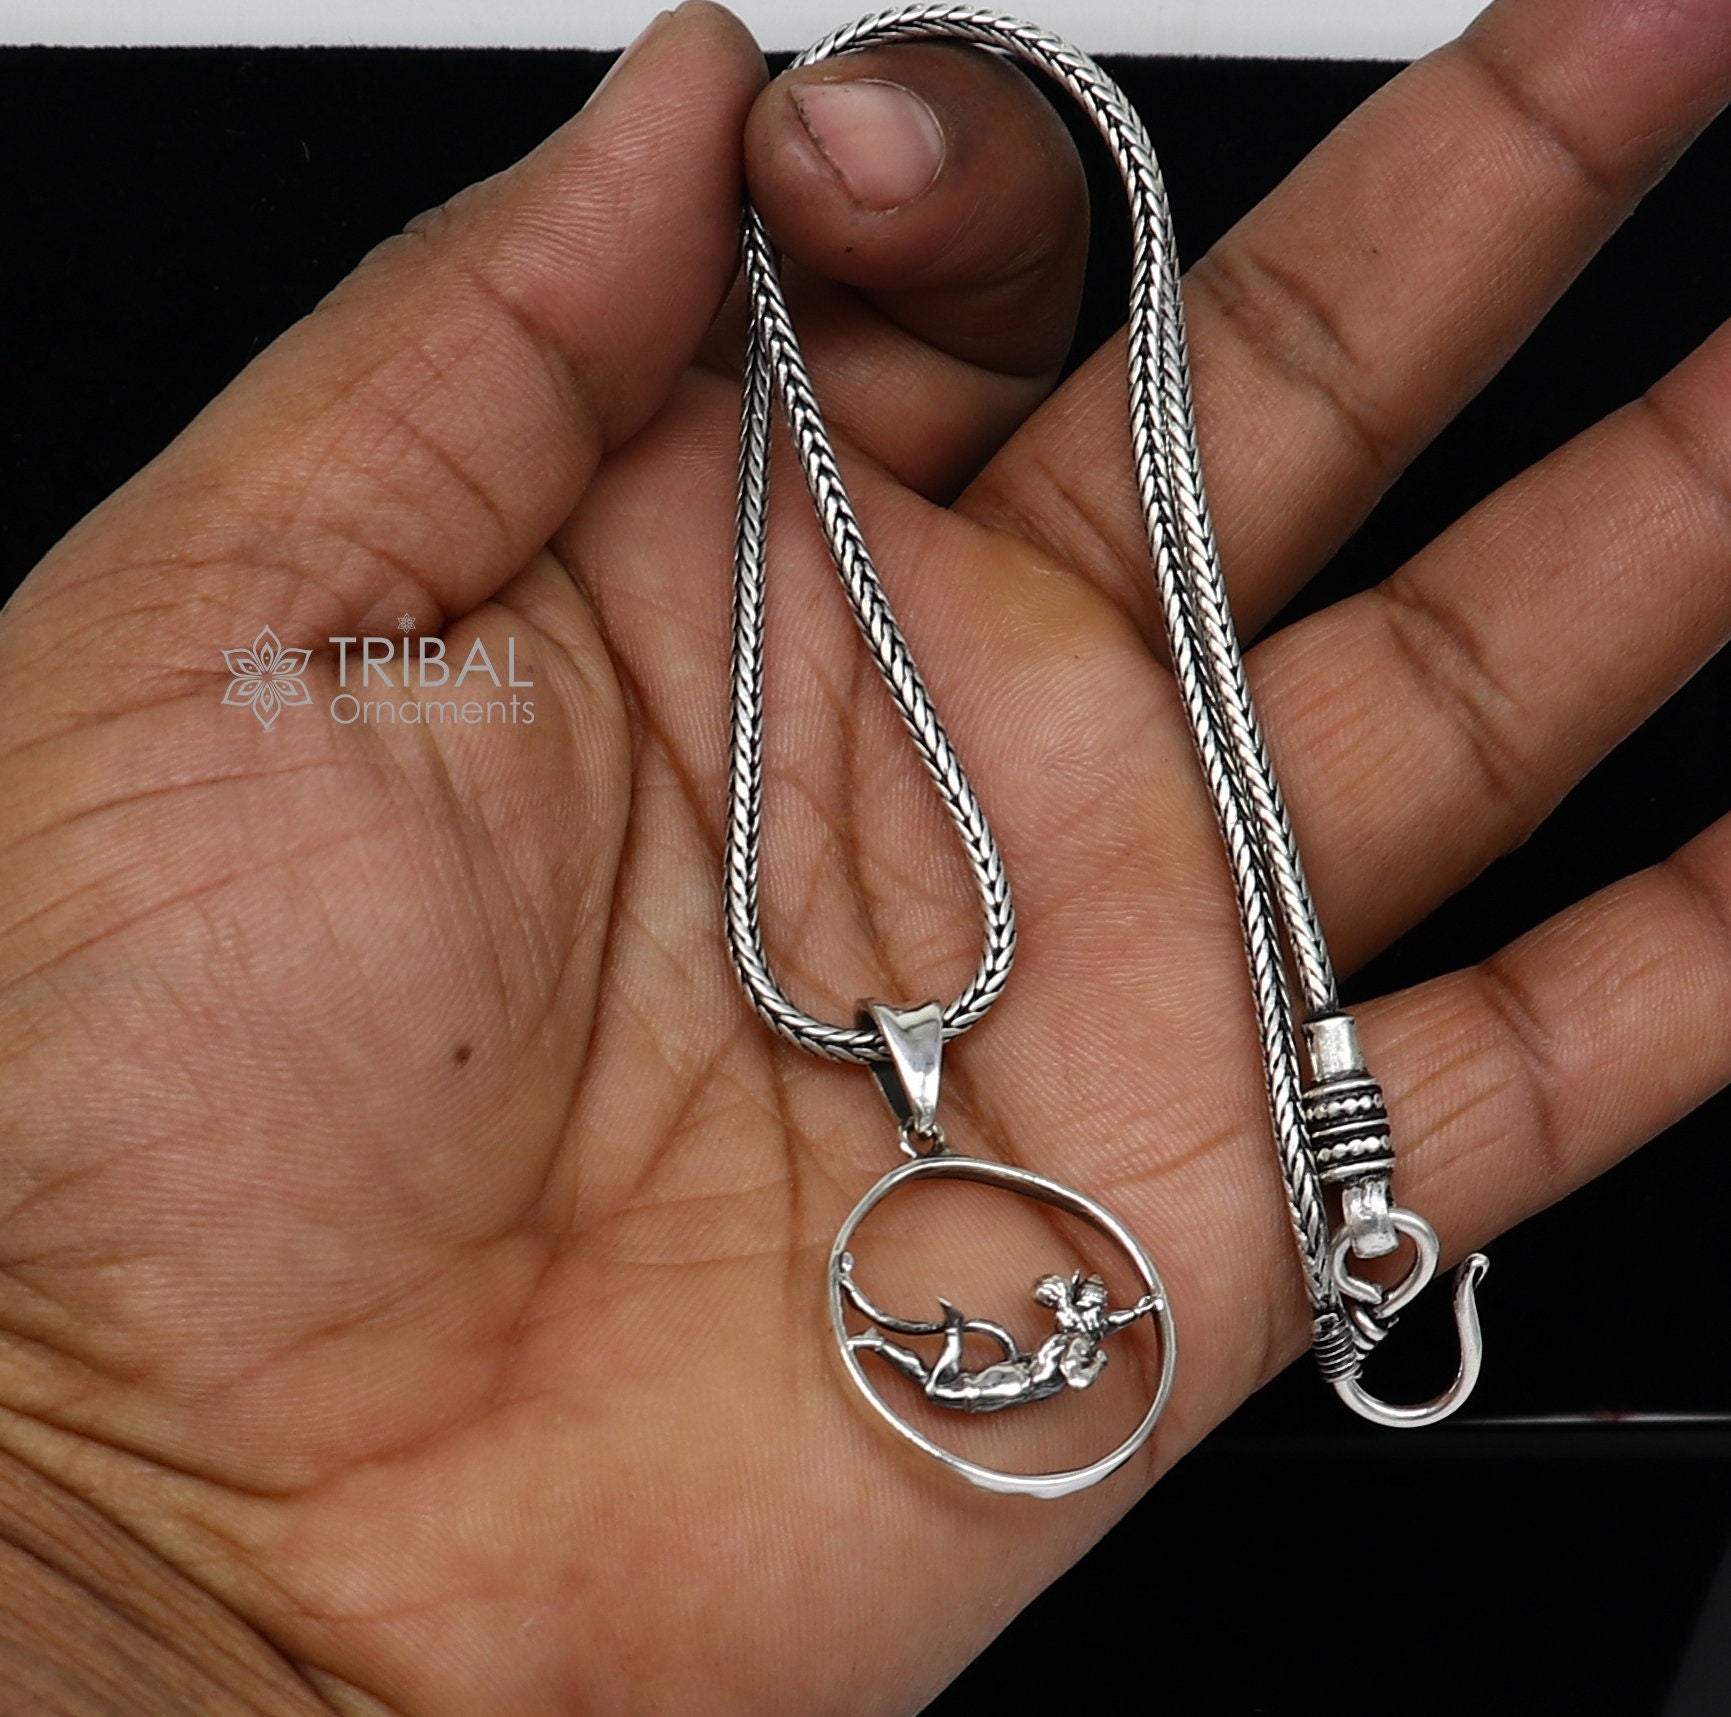 925 pure silver LORD HANUMAN pendant best gifting pendant, wheat chain necklace locket best gifting delicate unisex  jewelry nsp742 - TRIBAL ORNAMENTS